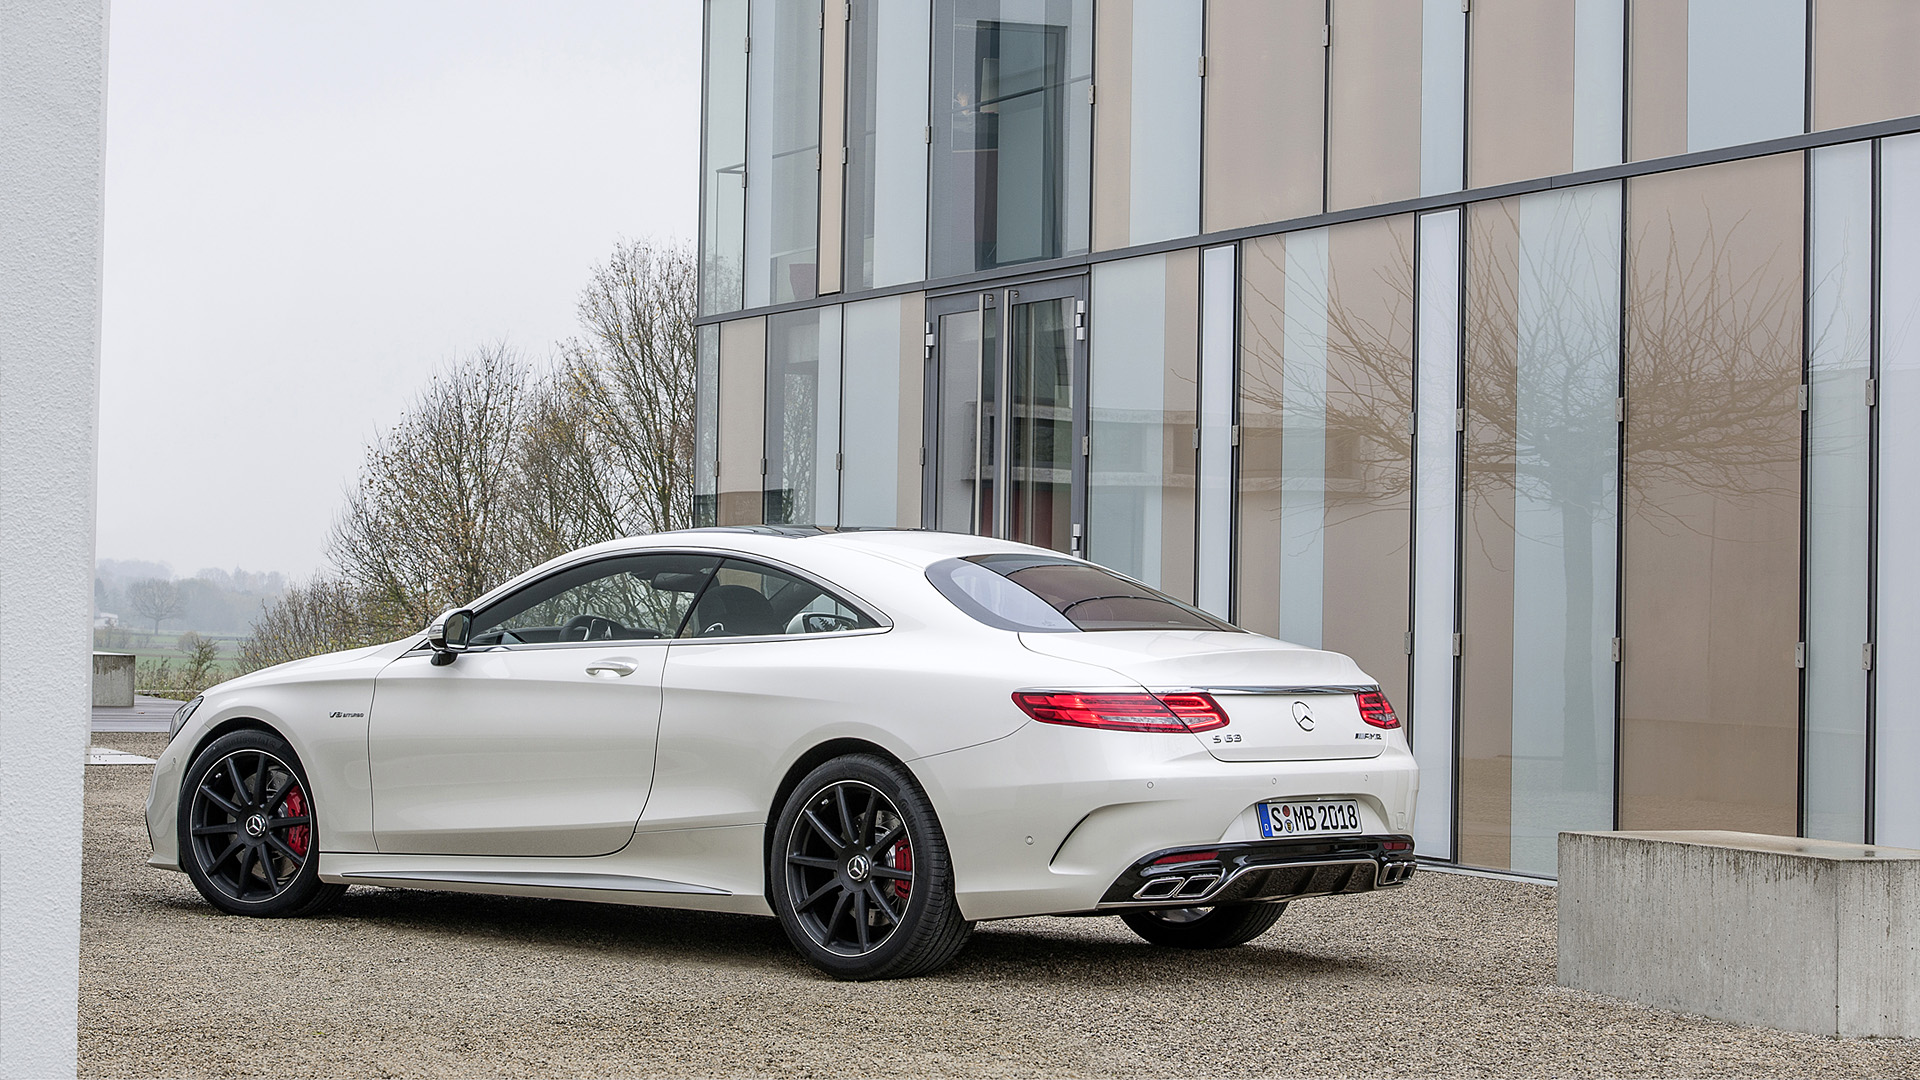  2015 Mercedes-Benz S63 AMG Coupe Wallpaper.